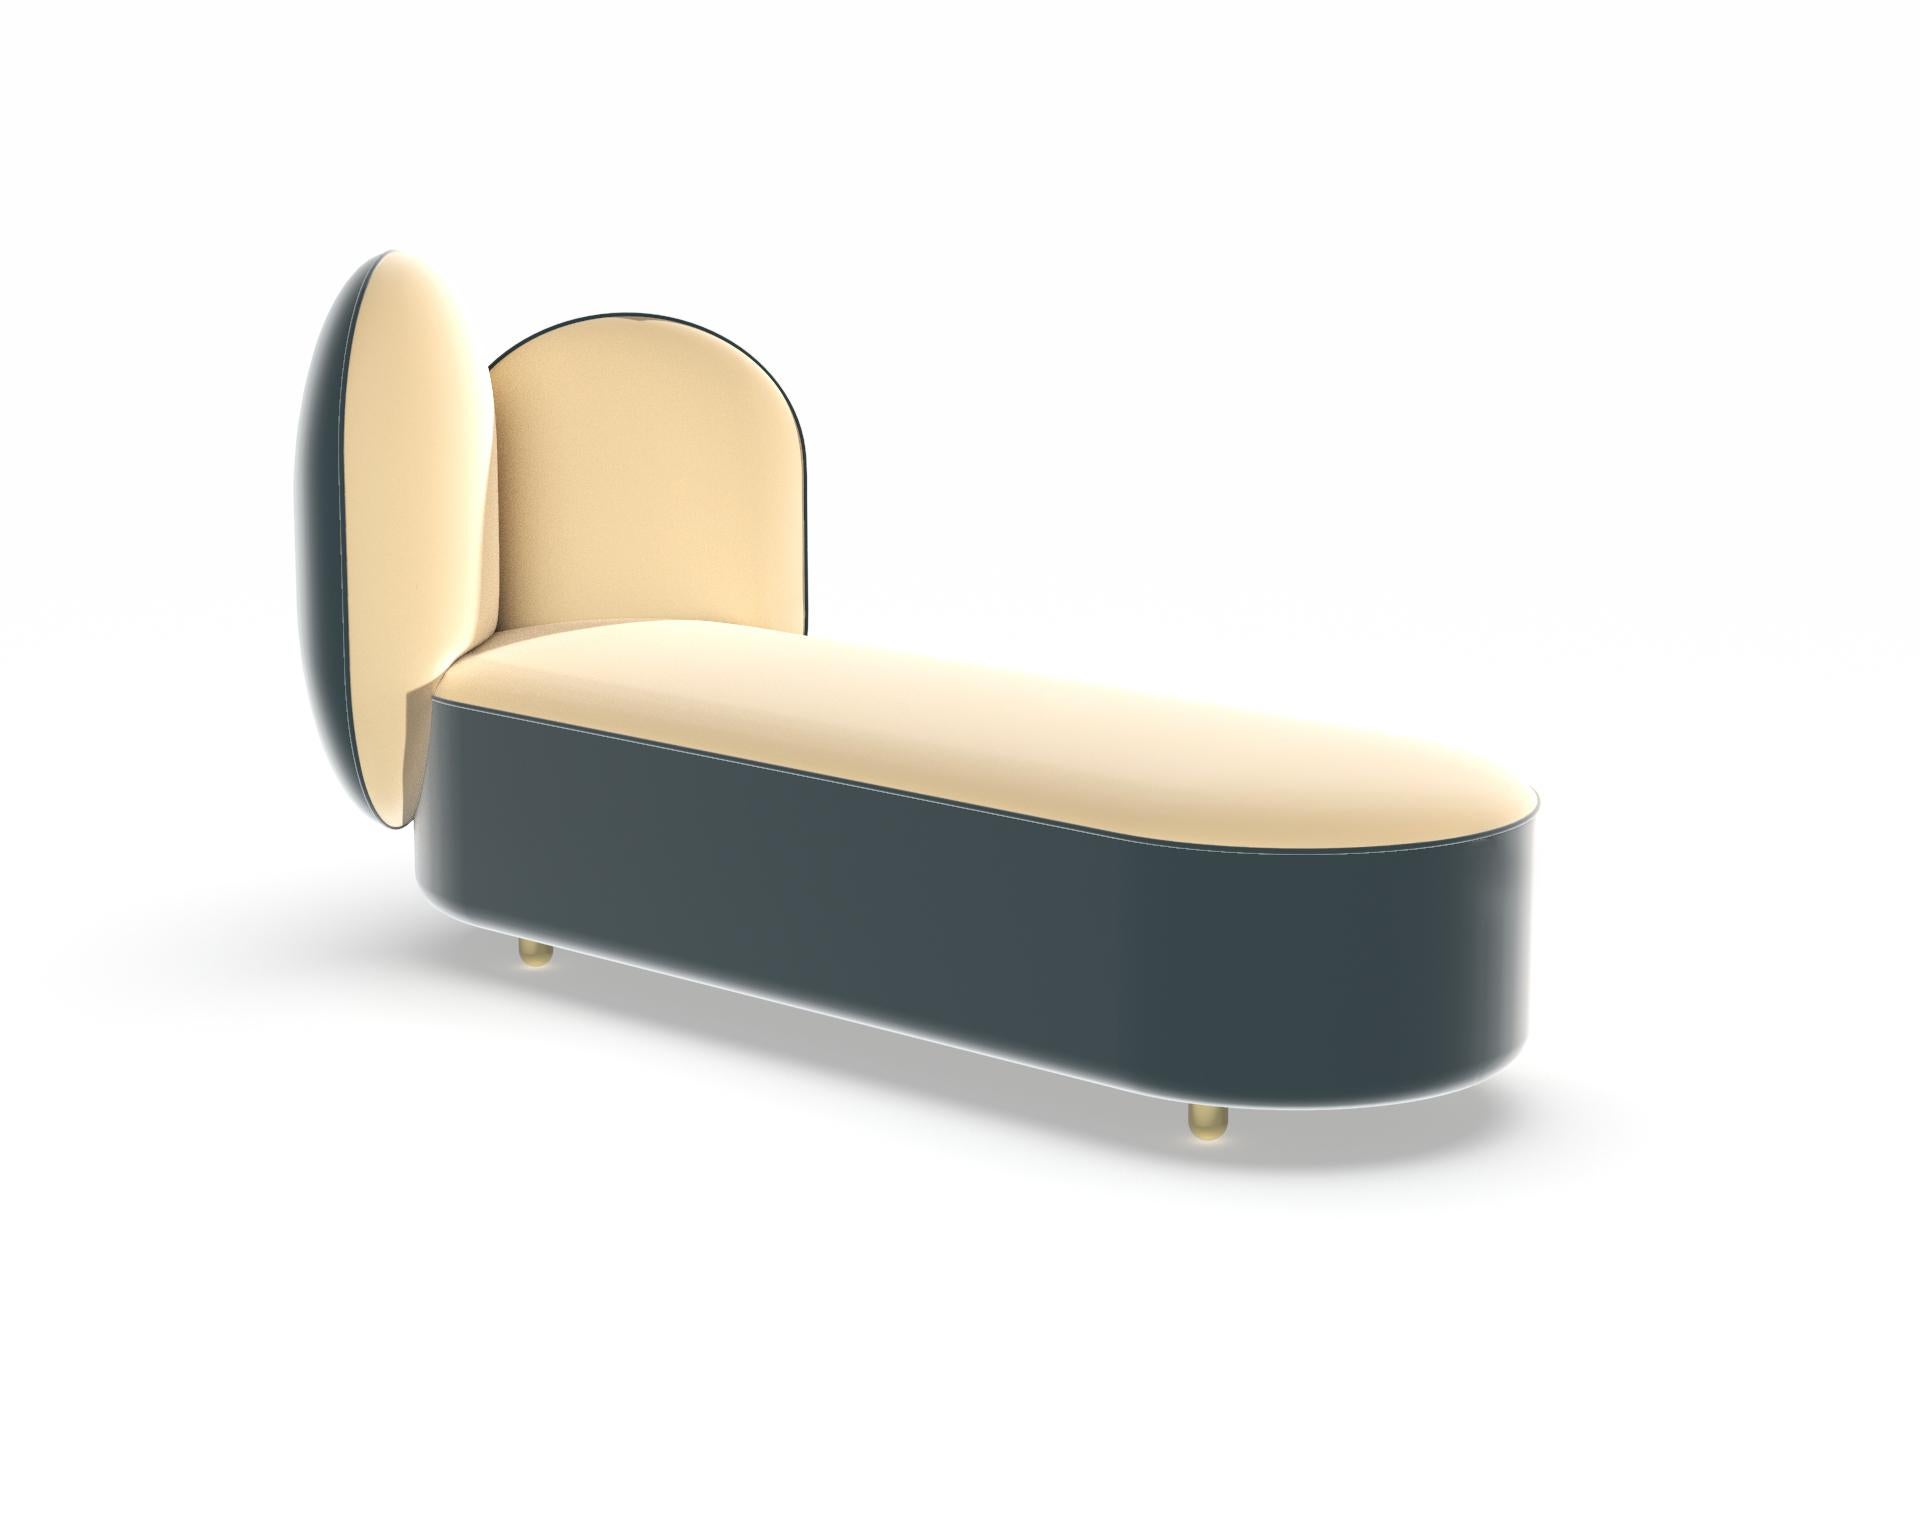 Yiban Yiban daybed designed by Thomas Dariel
Dimensions: D 60 x W 150 x H 90 cm 
Materials: Structure in solid timber and plywood, memory foam base, and seating fully upholstered in fabric, feet in plated metal glossy.
Available in different